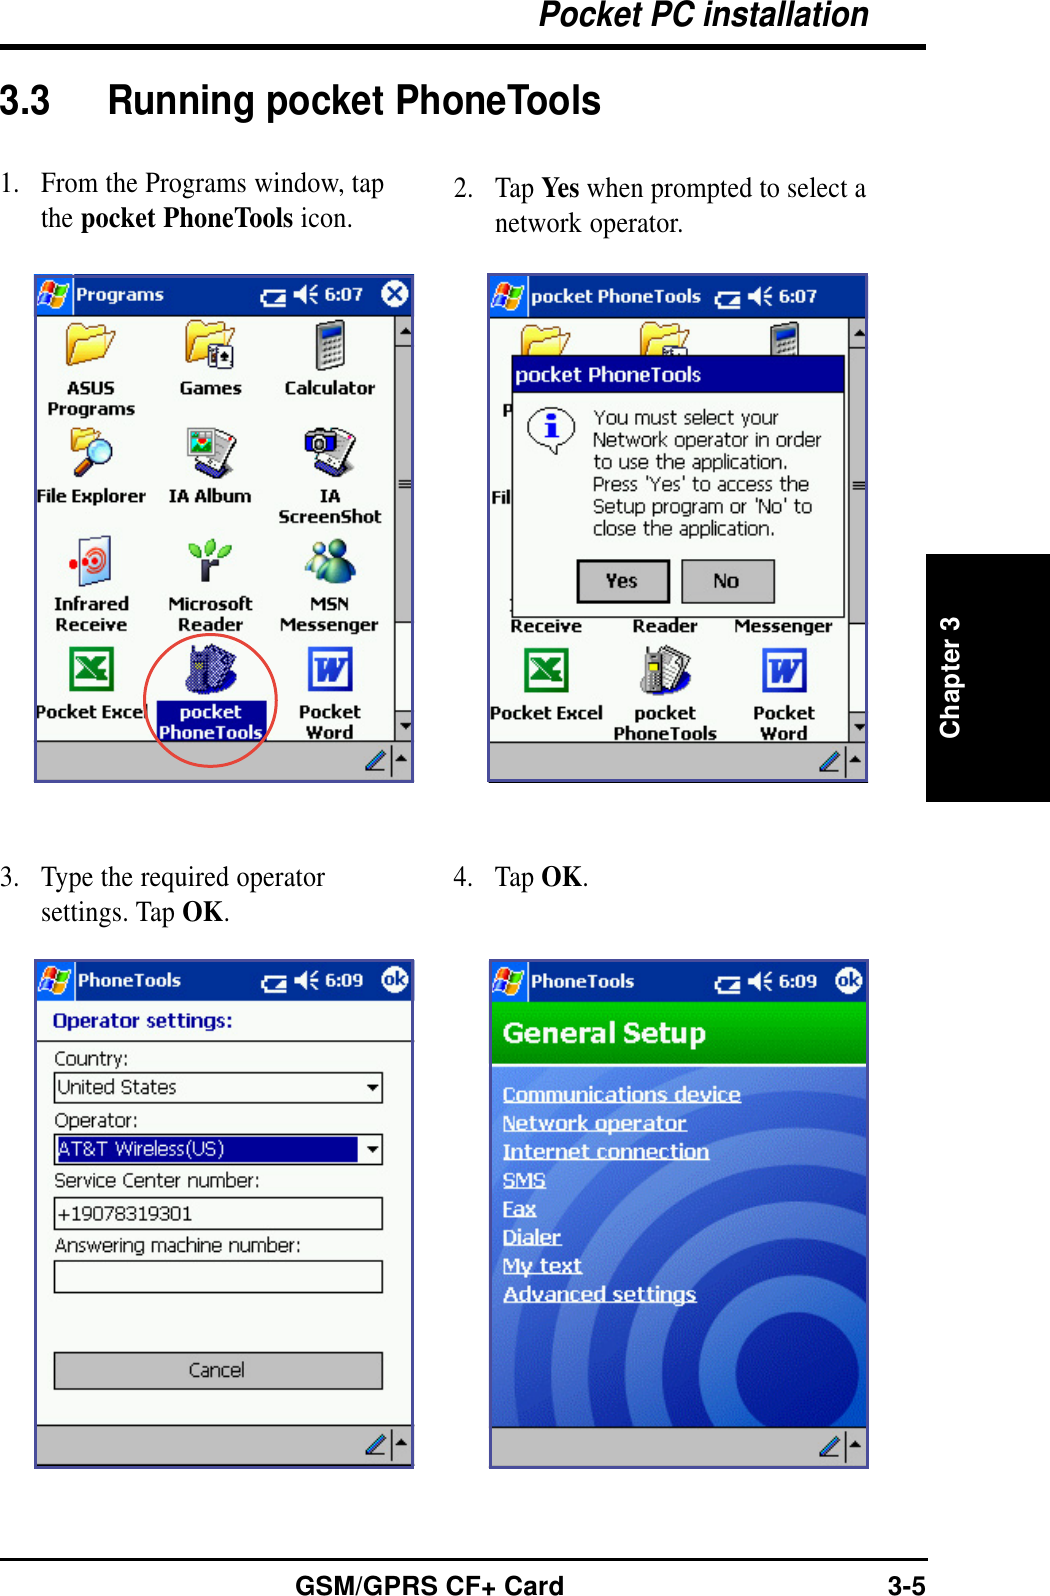 Chapter 3Pocket PC installationGSM/GPRS CF+ Card 3-53.3 Running pocket PhoneTools1. From the Programs window, tapthe pocket PhoneTools icon. 2. Tap Yes when prompted to select anetwork operator.3. Type the required operatorsettings. Tap OK.4. Tap OK.